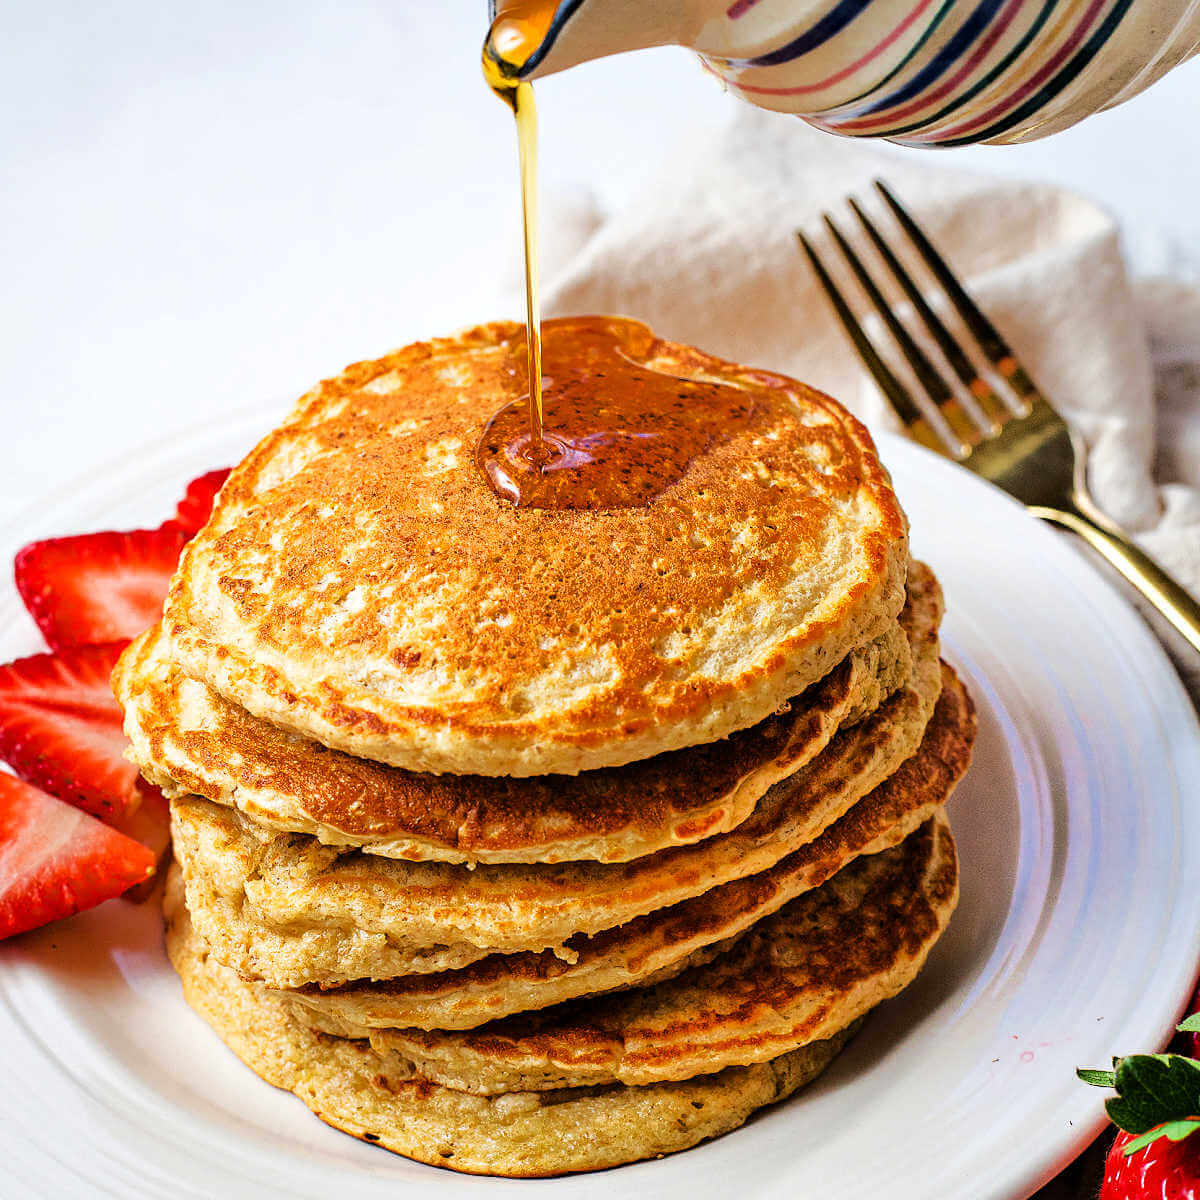 Pouring syrup over a stack of oat flour pancakes on a plate.